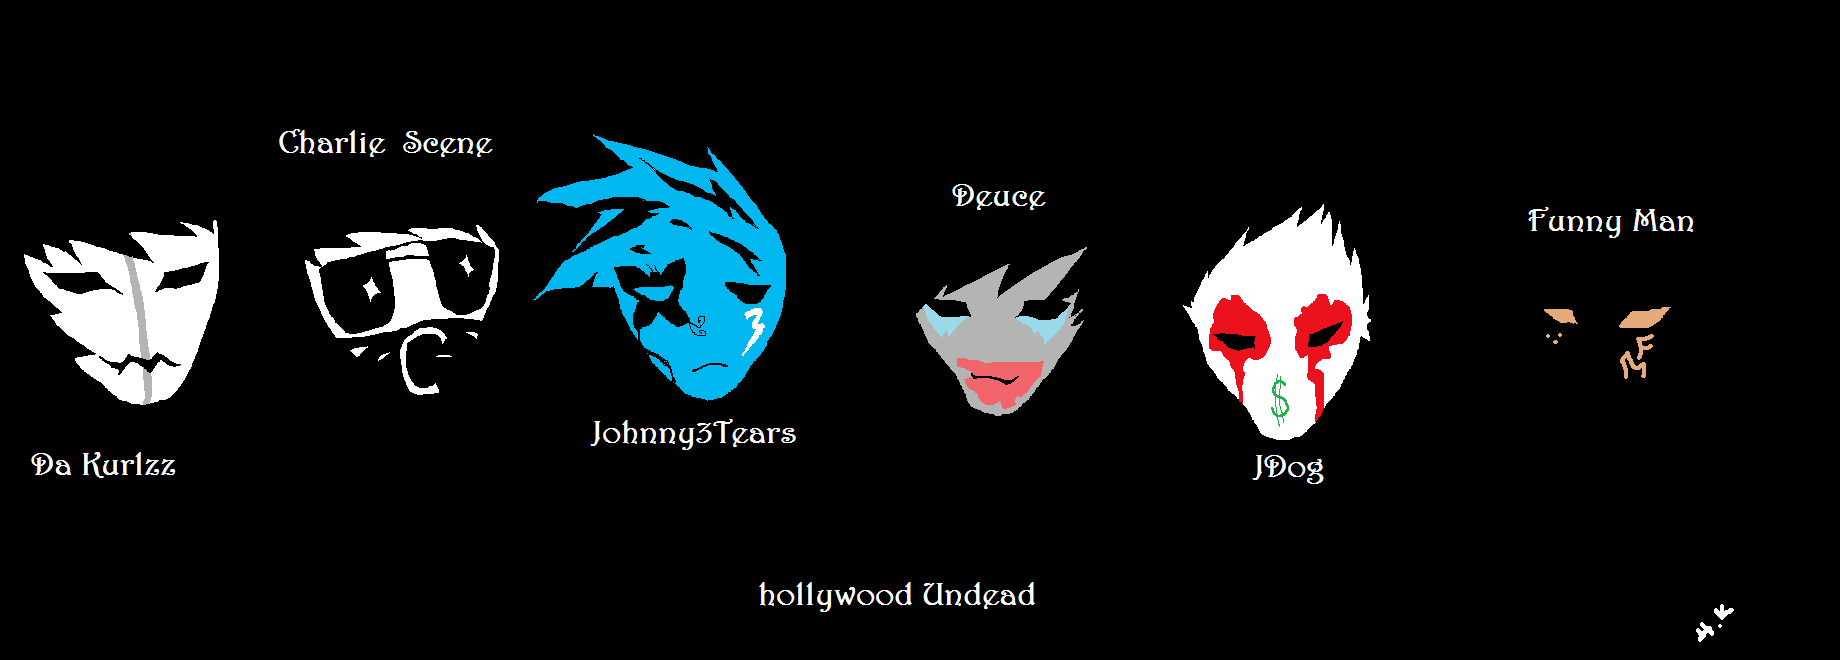 Hollywood Undead Wallpaper 9 By Welcometobloodstone HD Walls Find